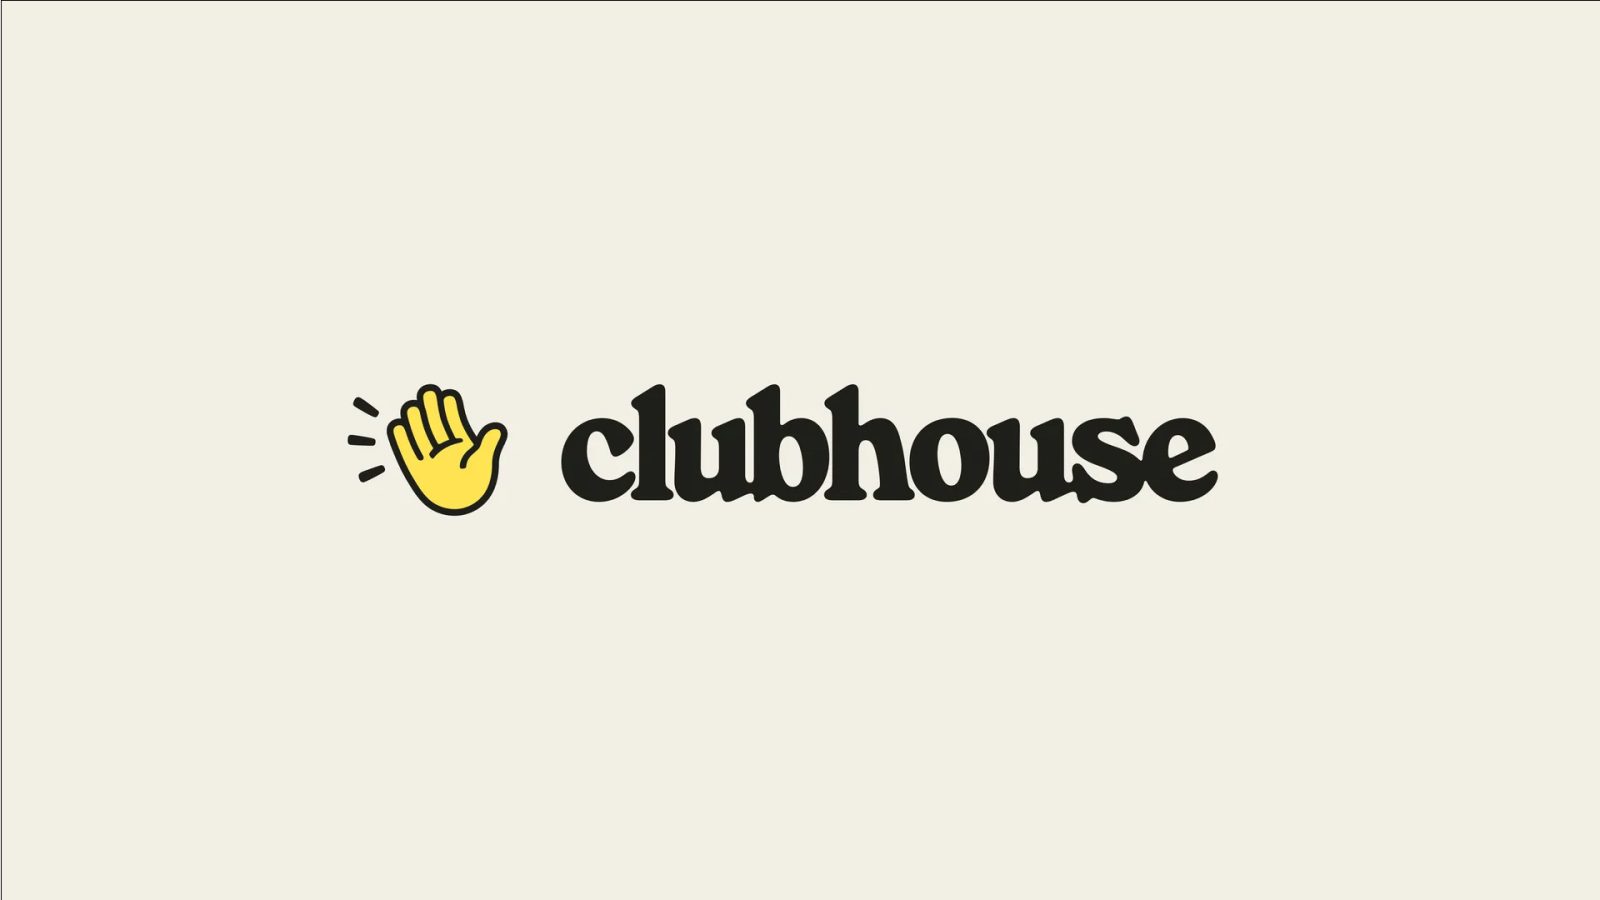 Clubhouse lays off half of its employees in an attempt to stay relevant.